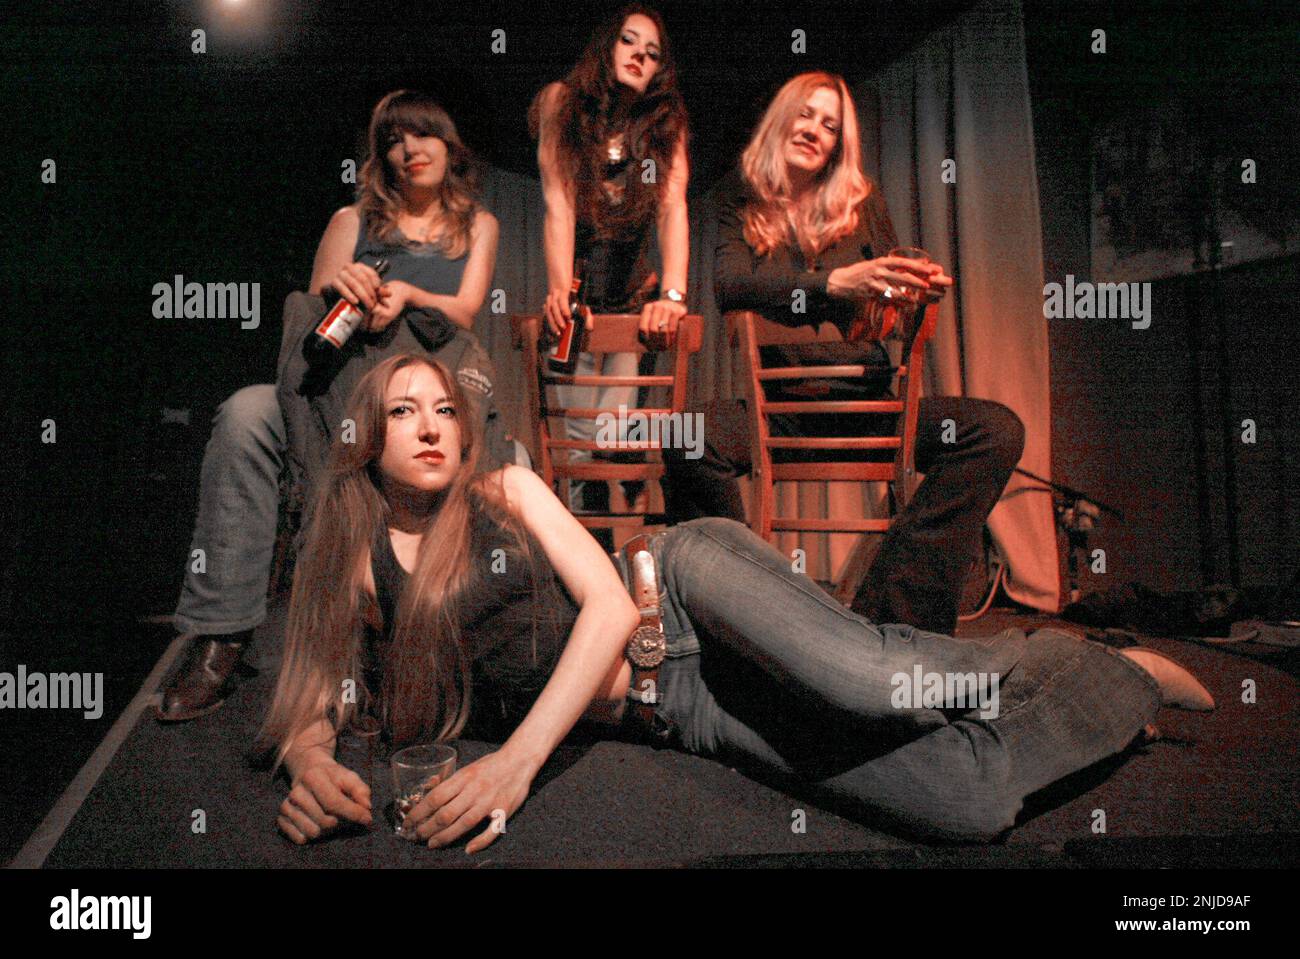 skildring ketcher Hick COVERBANDS07 107 LH.JPG In back is Mallary Young (left, rythym guitar),  Riff Williams (middle, bass), Phyllis Rudd (right, drums). In front is  singer Bonny Scott. AC/DShe is an all-girl AC/DC homage. Shot